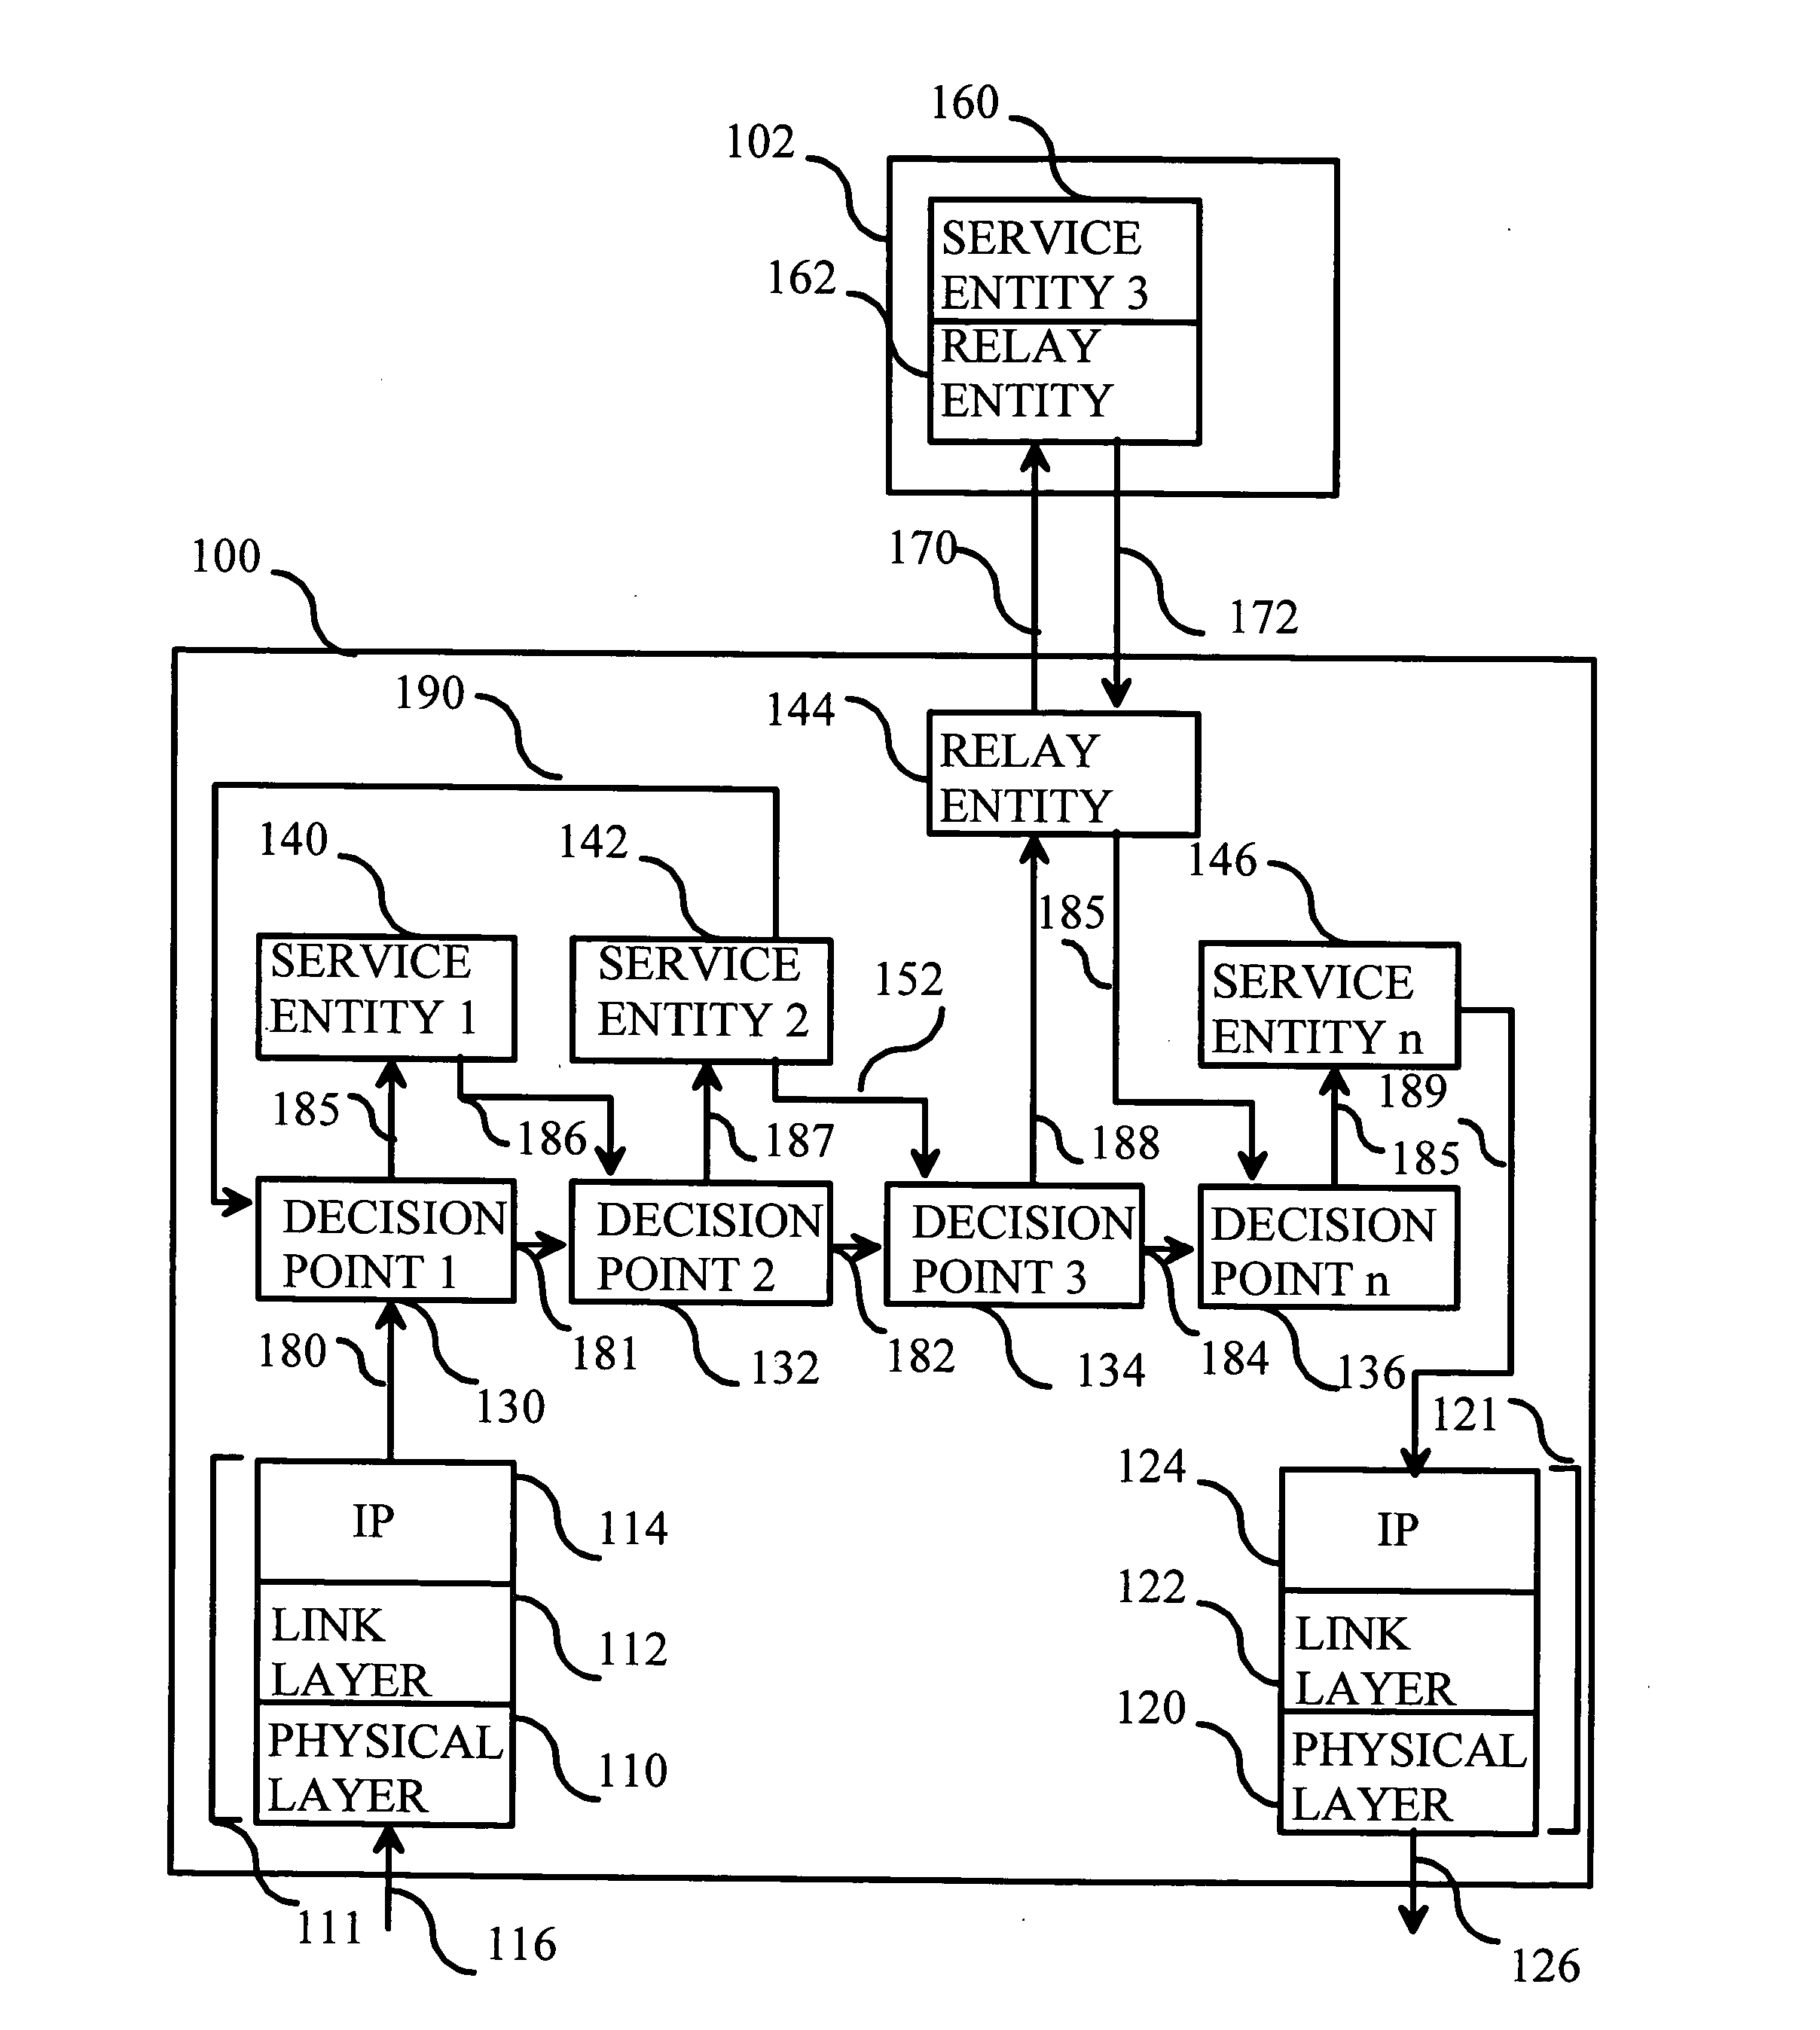 Method for service chaining in a communication network